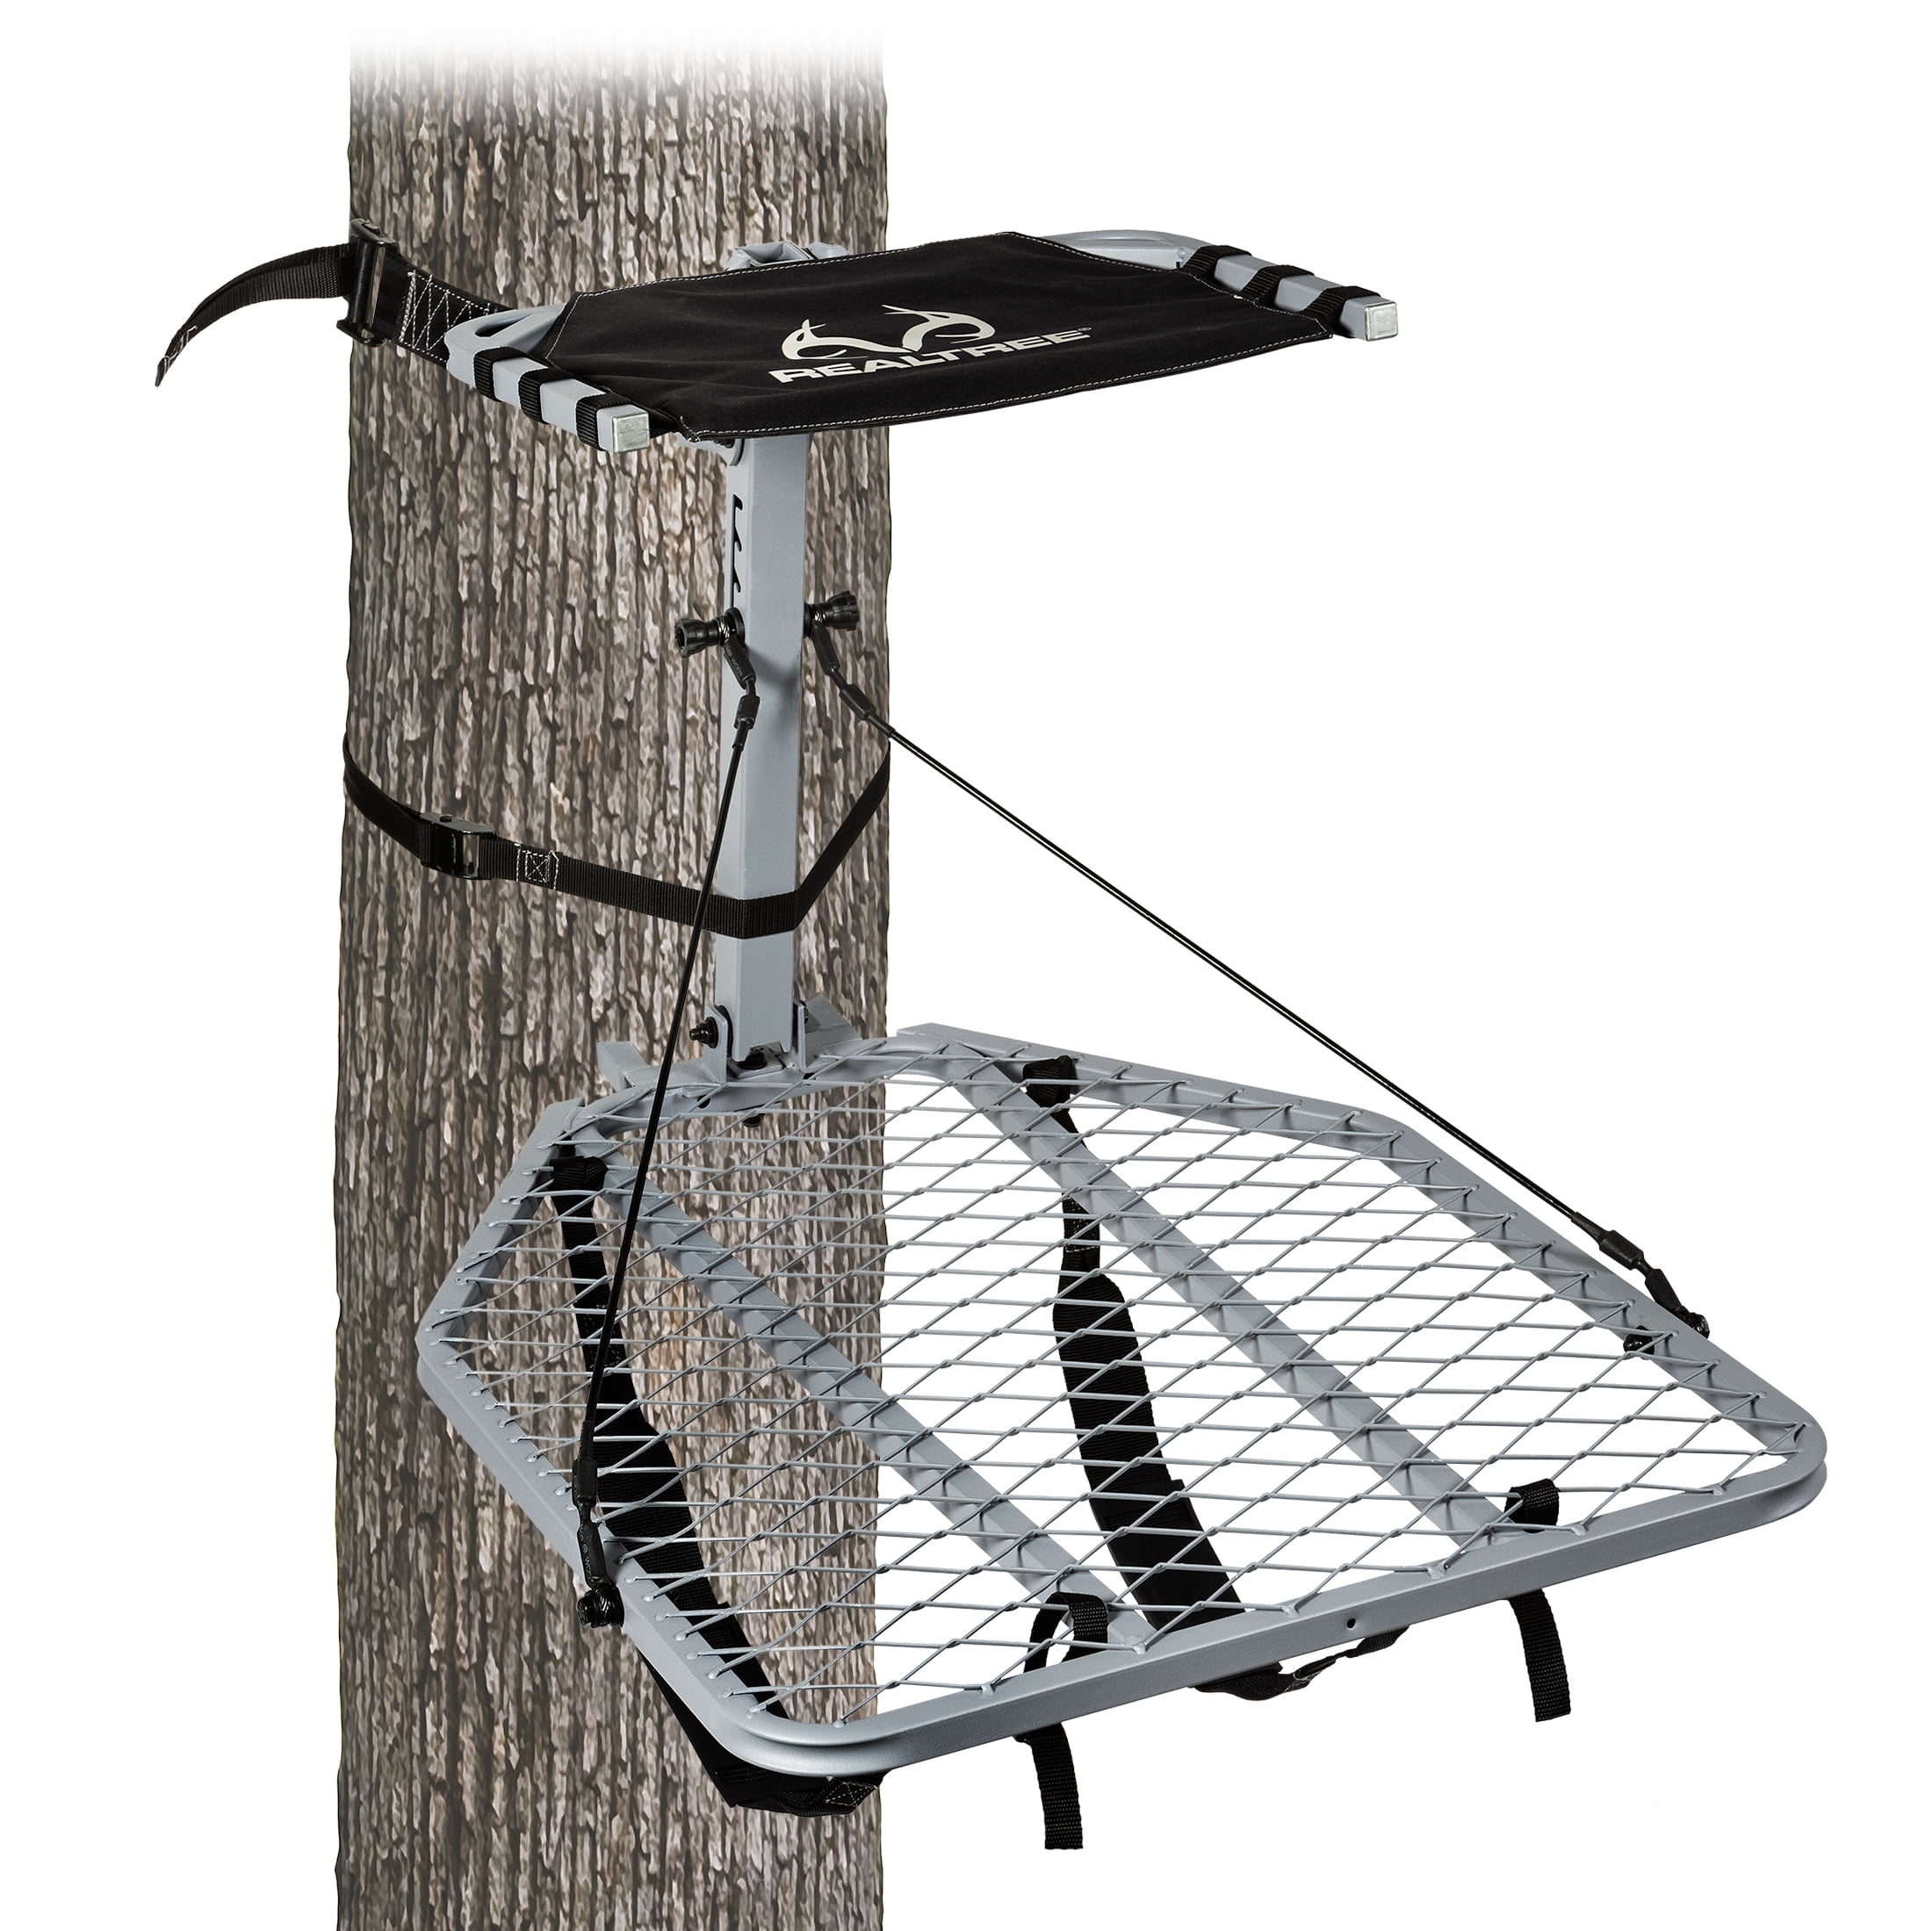 Two Man Ladder Tree Stand 18' Game Stands Gun Bow Hunting Harness Deer 2 Person 